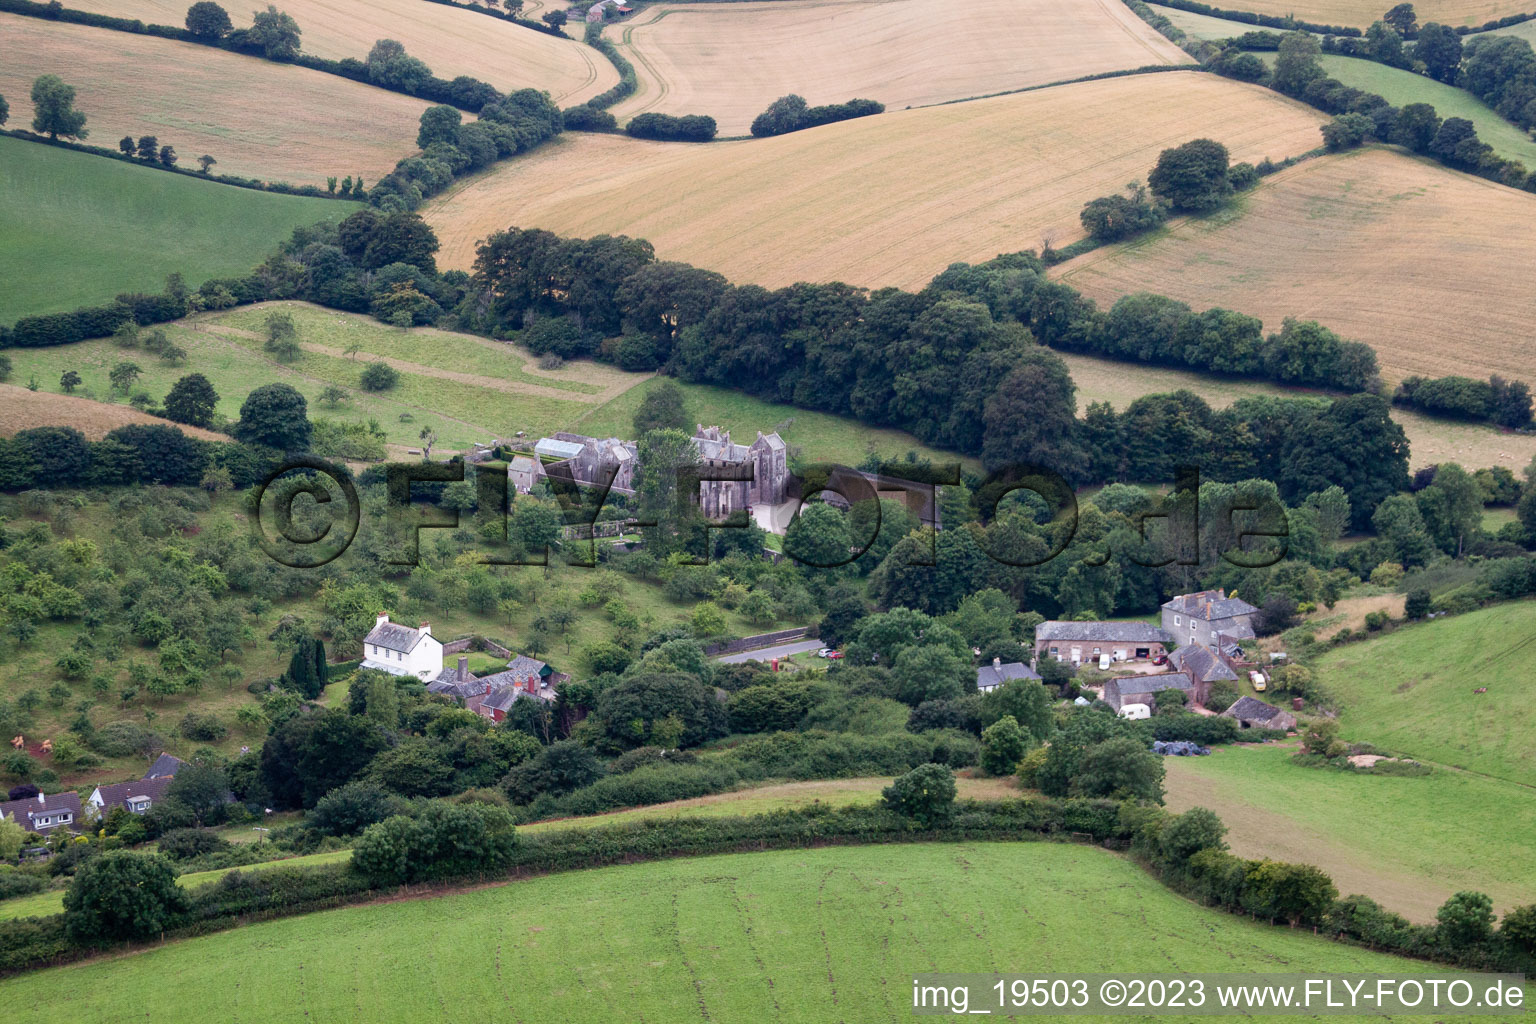 Marldon in the state England, Great Britain out of the air